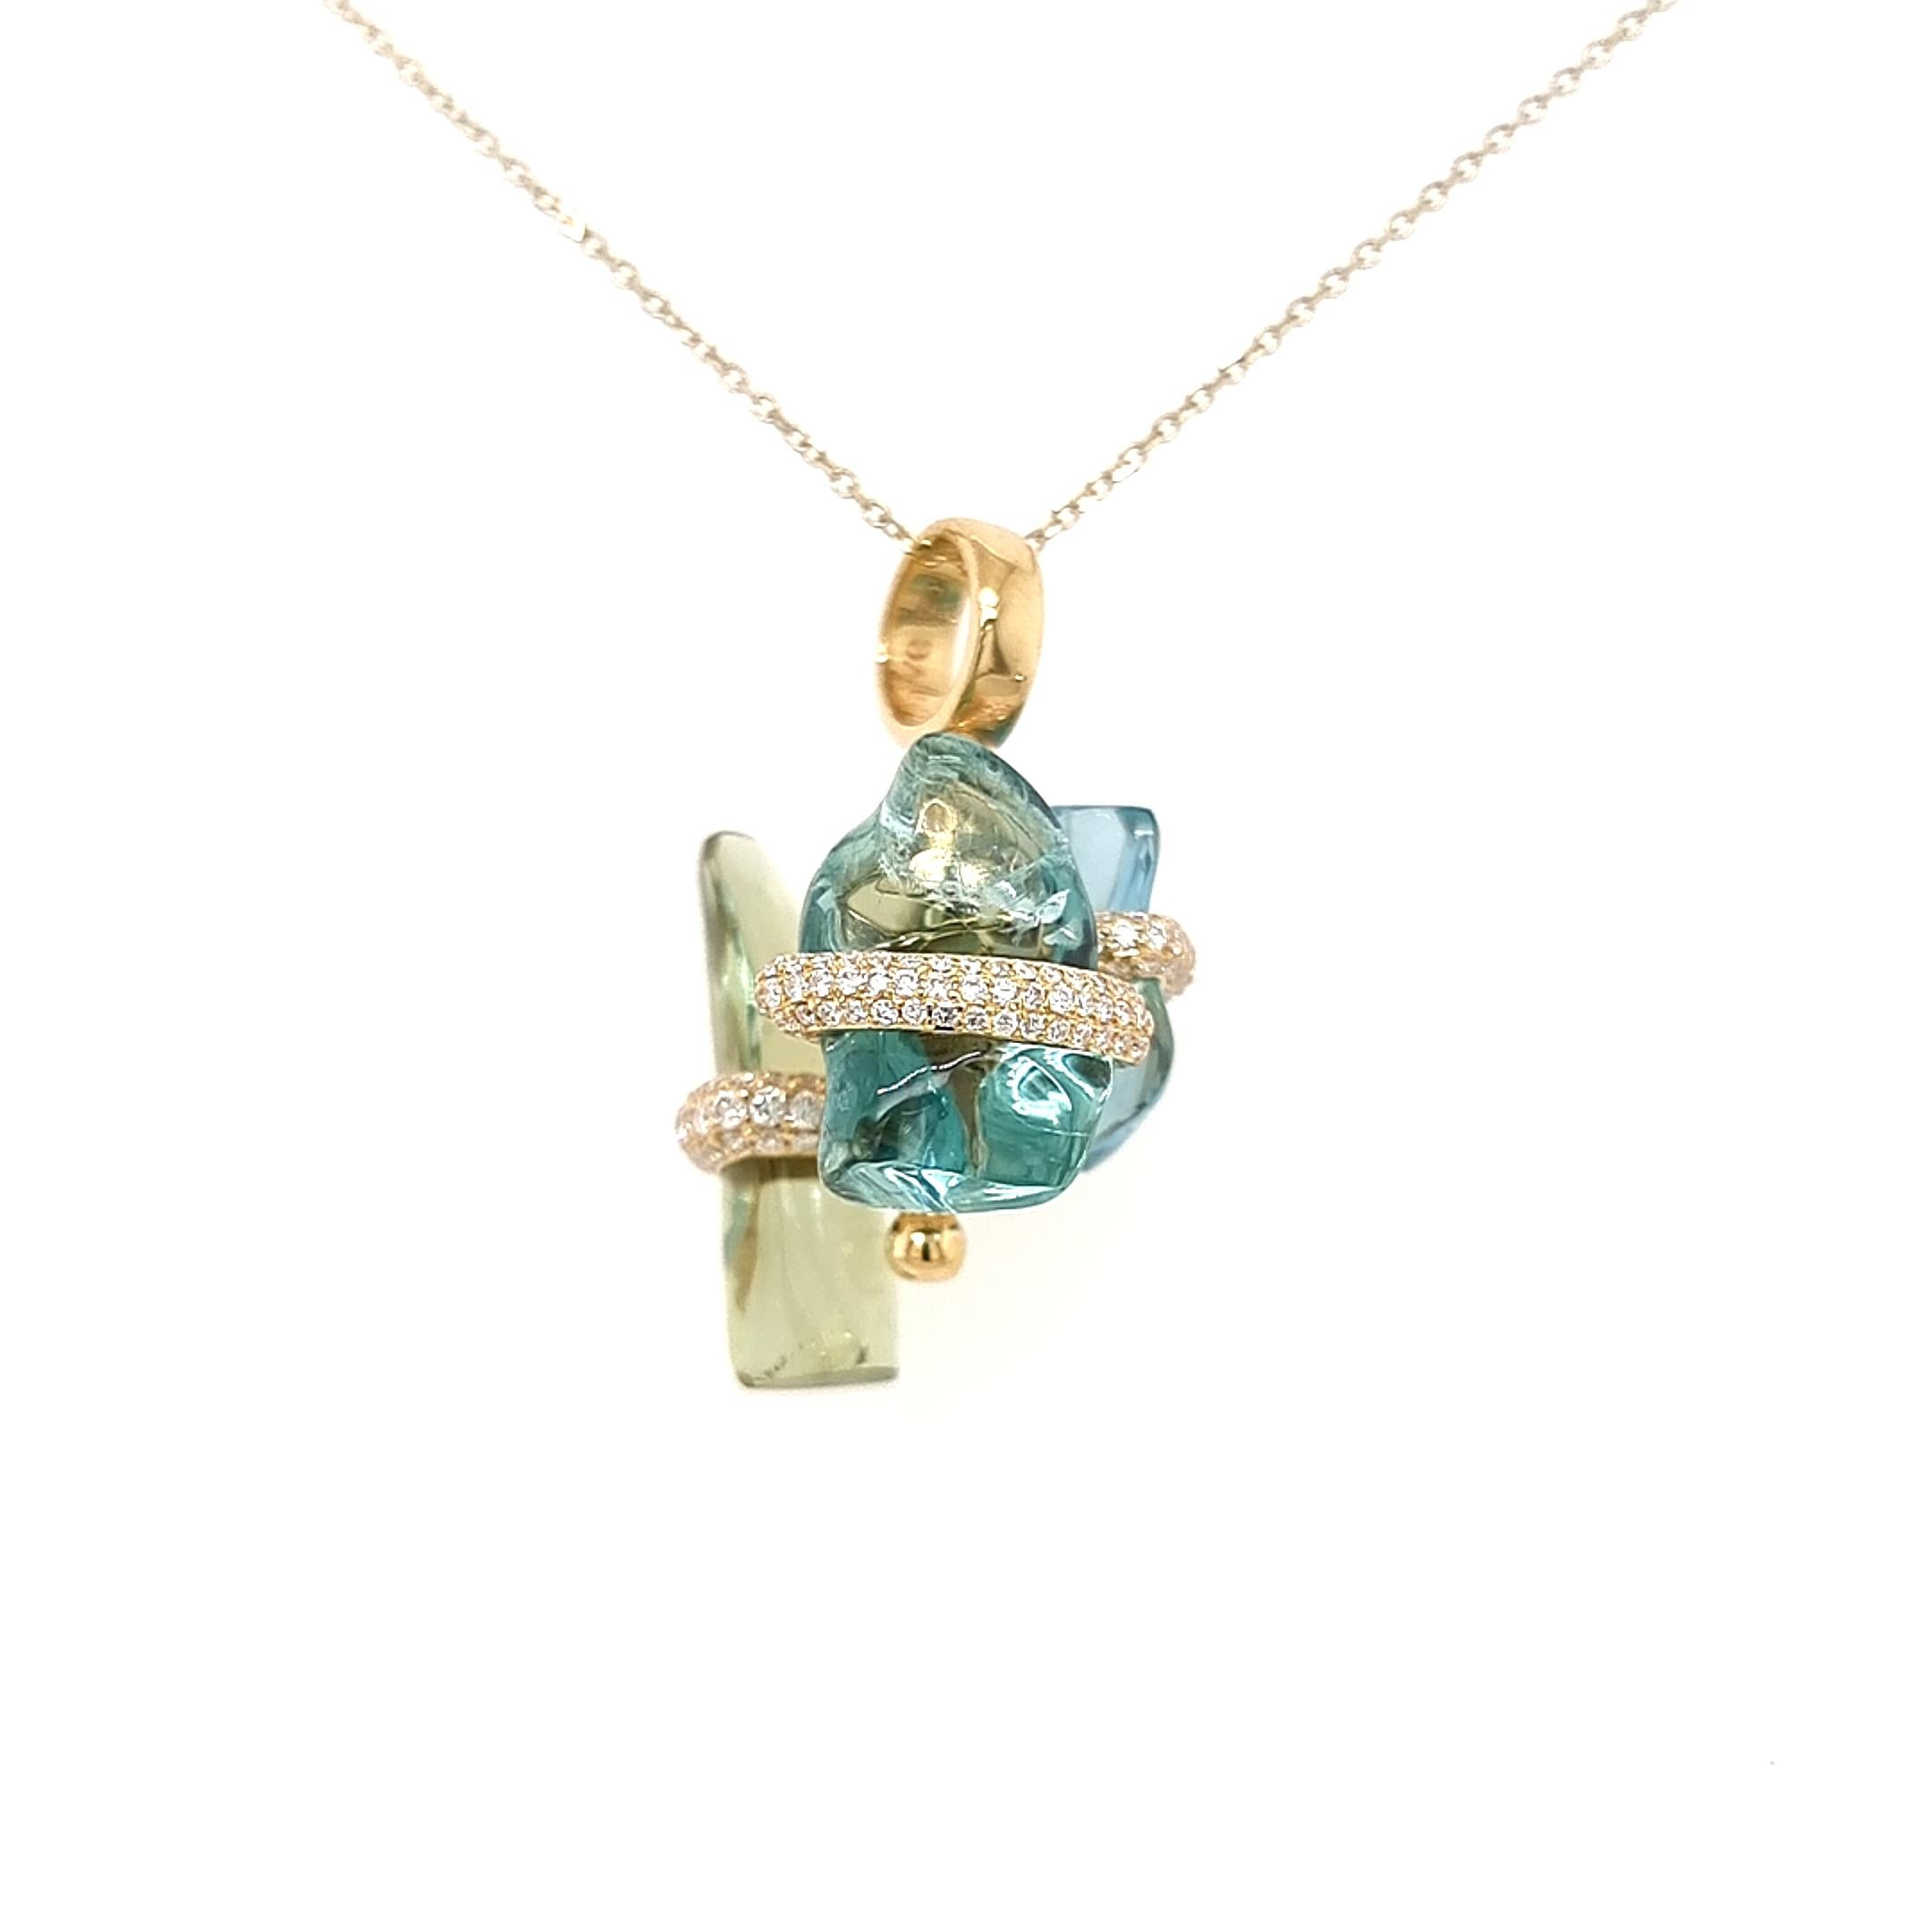 Organic collection by VOTIVE.

Introducing VOTIVE's exquisite Organic collection, featuring a captivating 18K yellow gold pendant adorned with lustrous white diamonds, uncut tanzanite, and uncut blue sapphire gemstones. The pendant's natural and